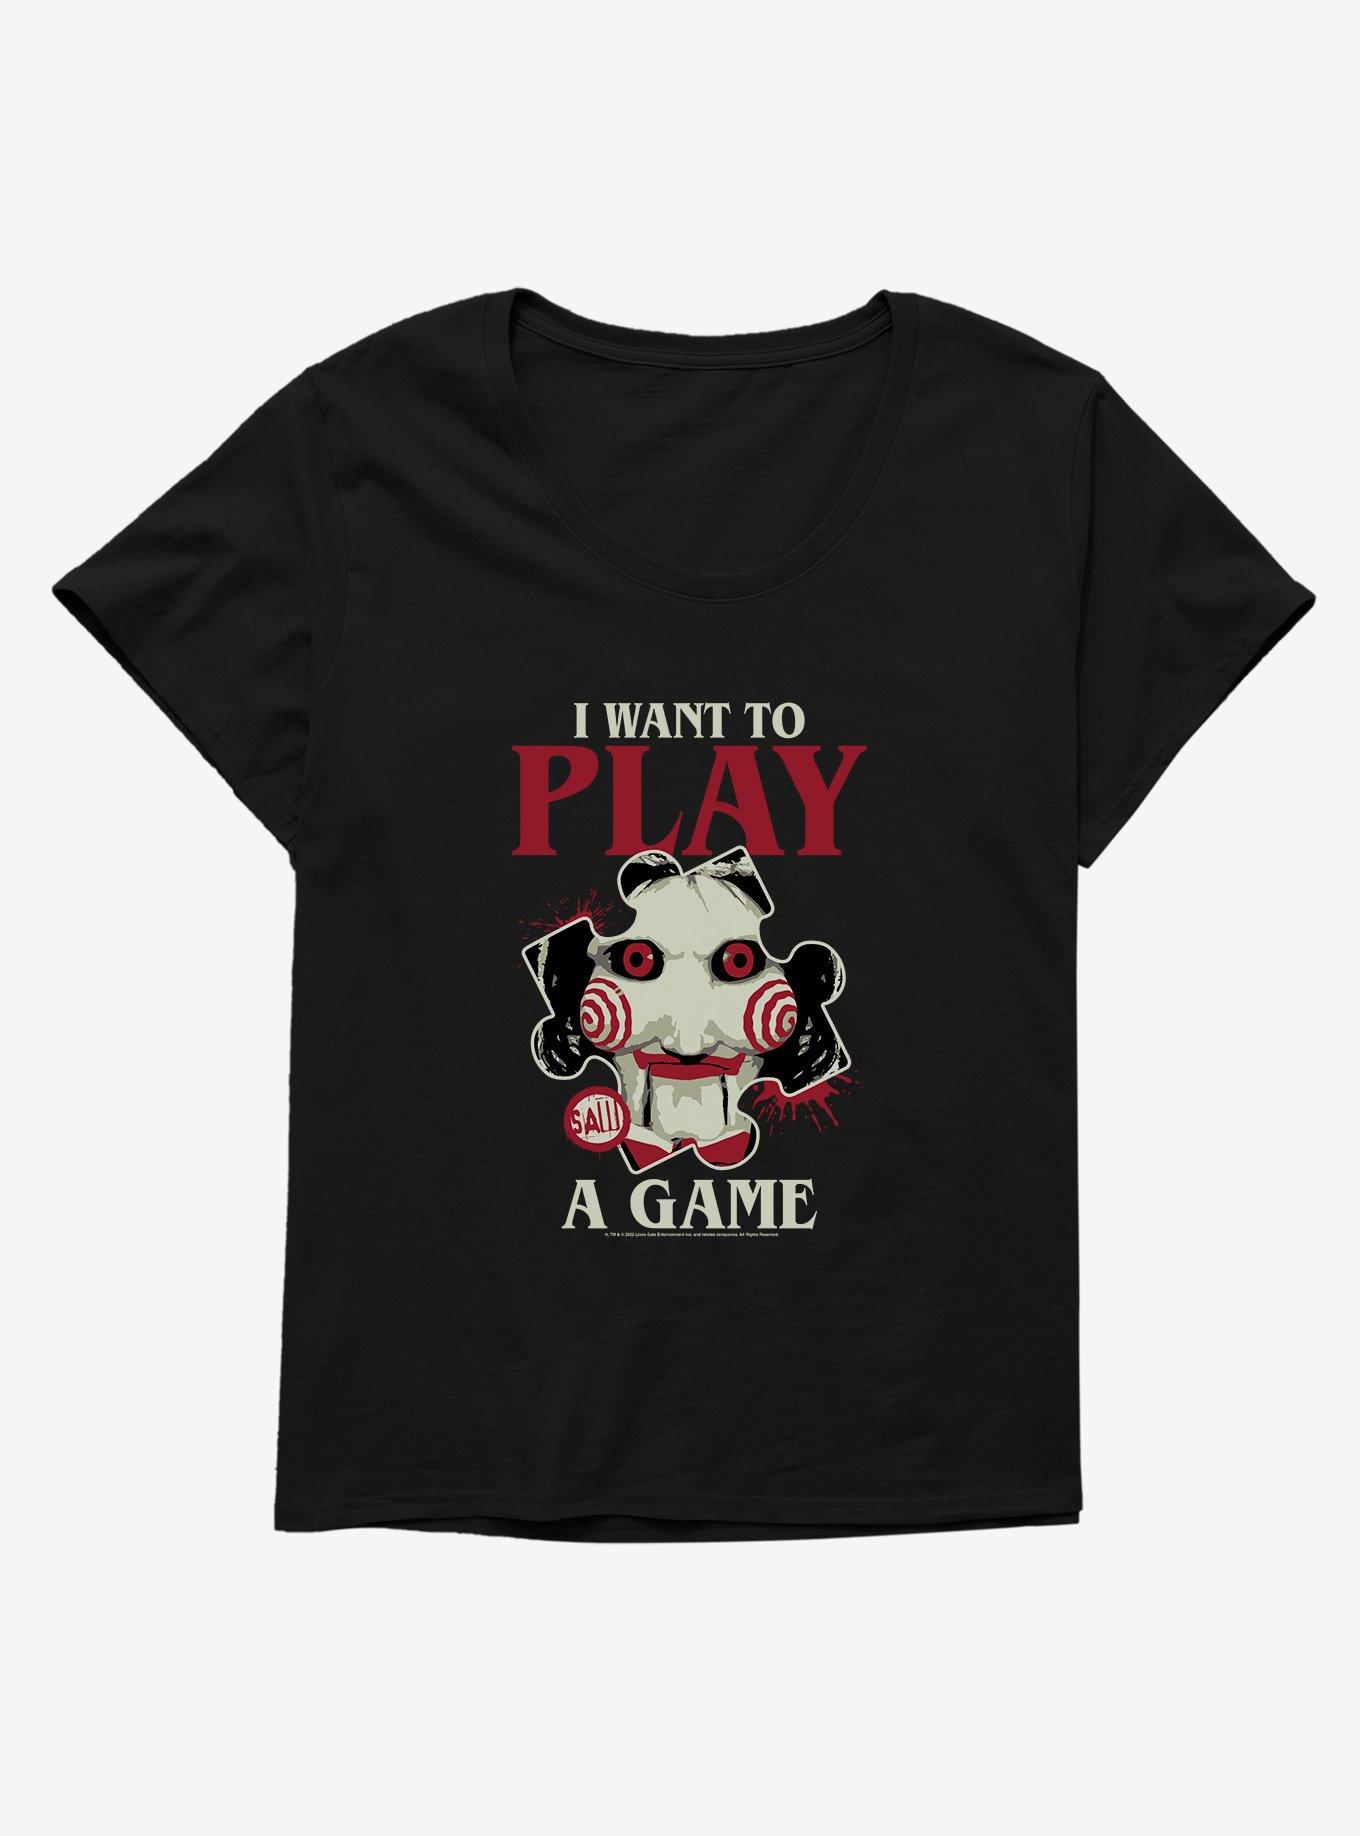 Saw I Want To Play A Game Girls T-Shirt Plus